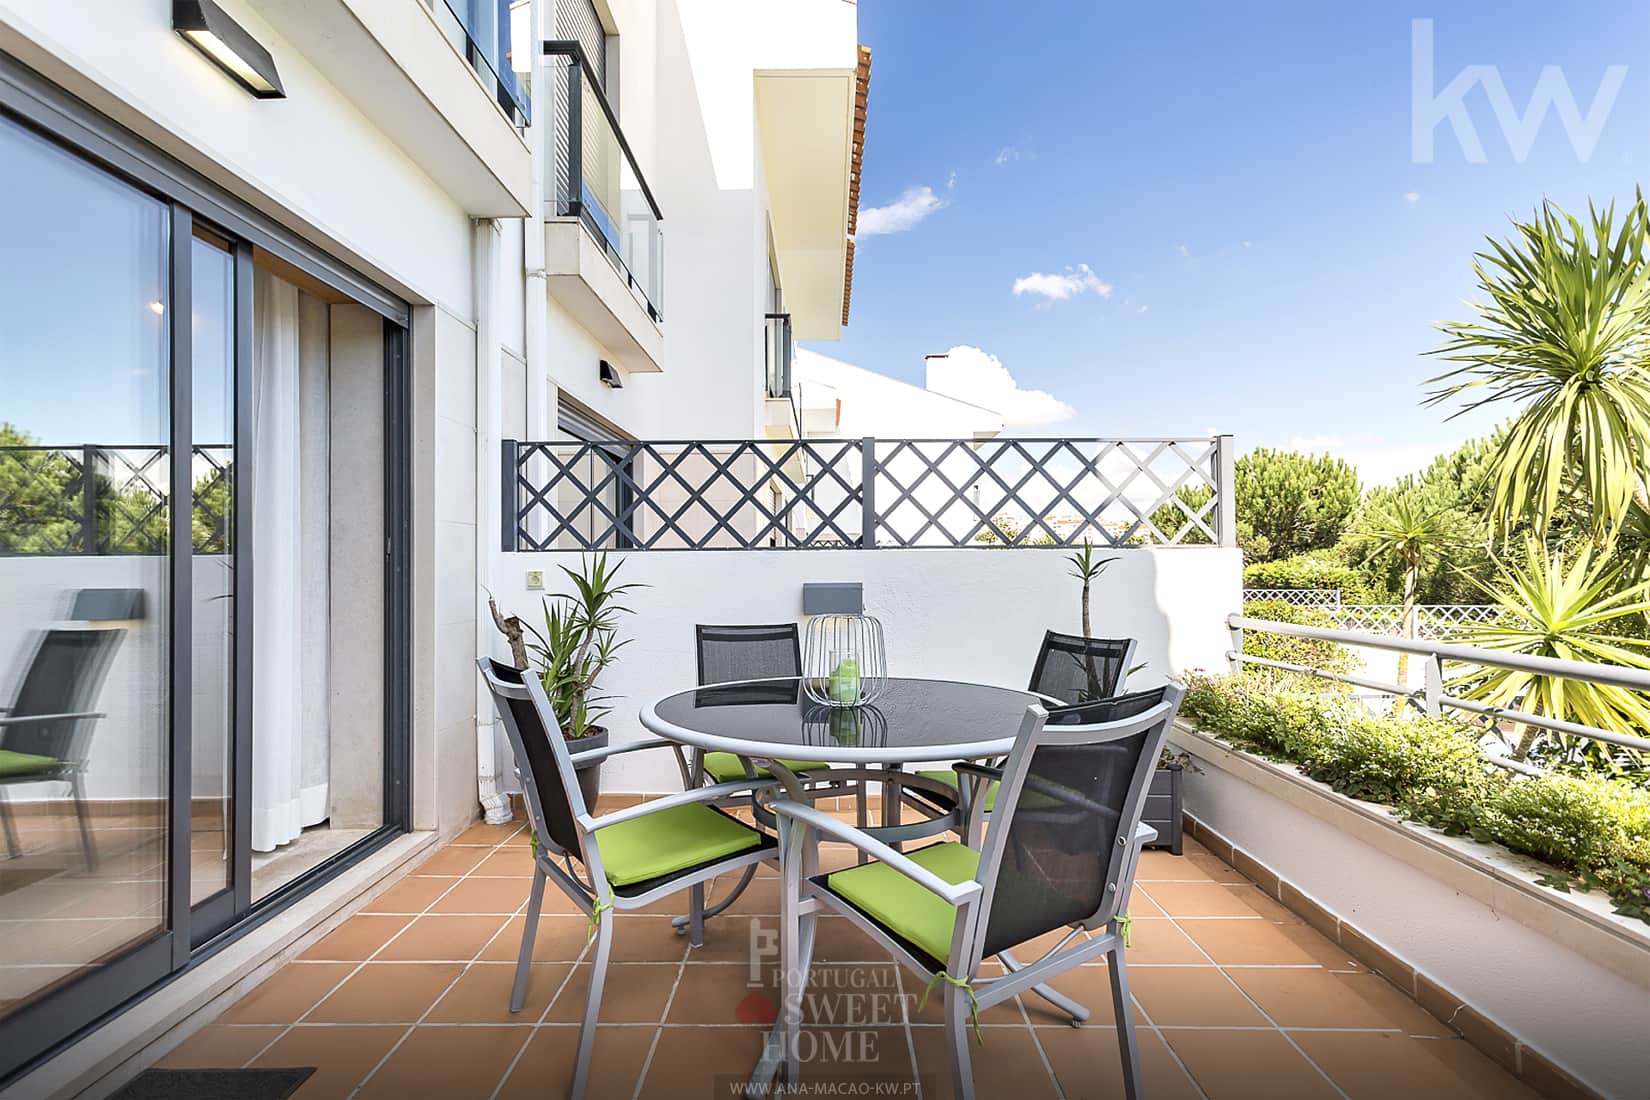 Large terrace (10.7 m²) overlooking the garden and pool